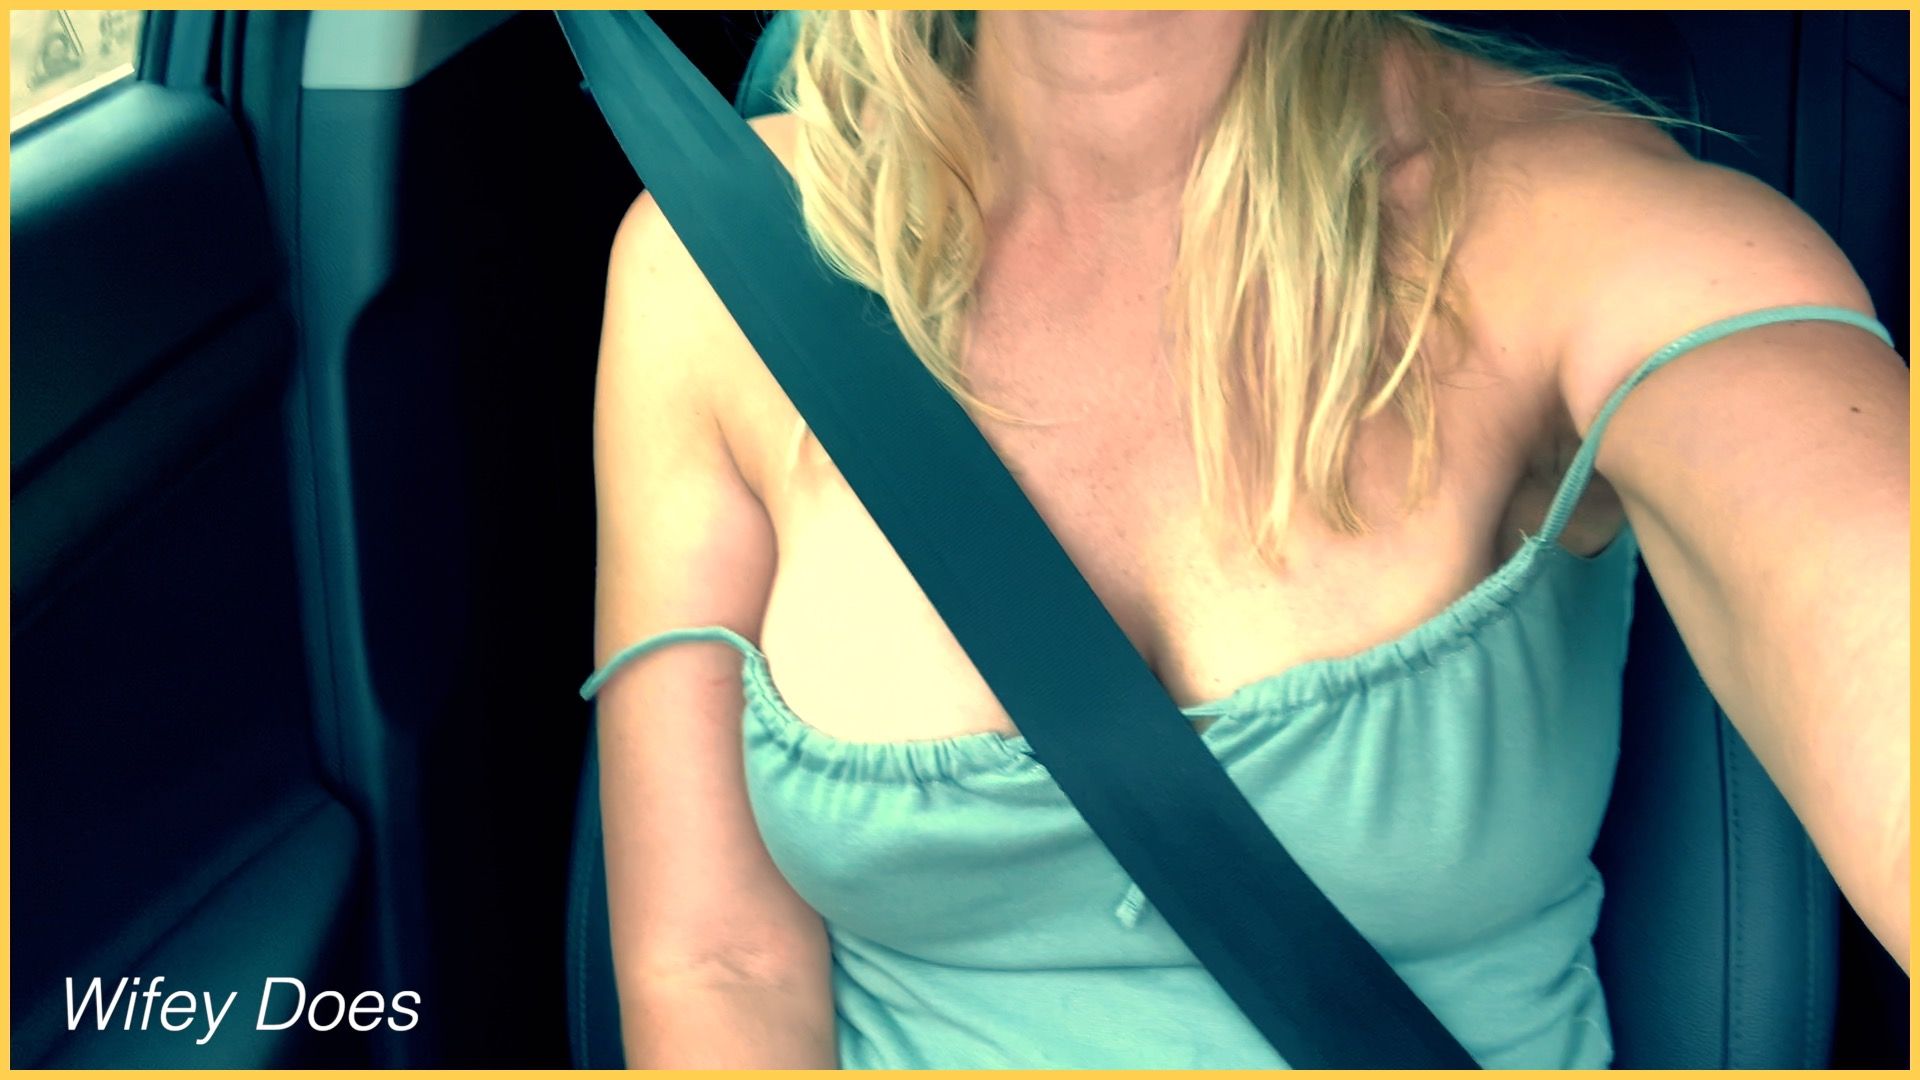 Wifey gets her tits bounced in the car